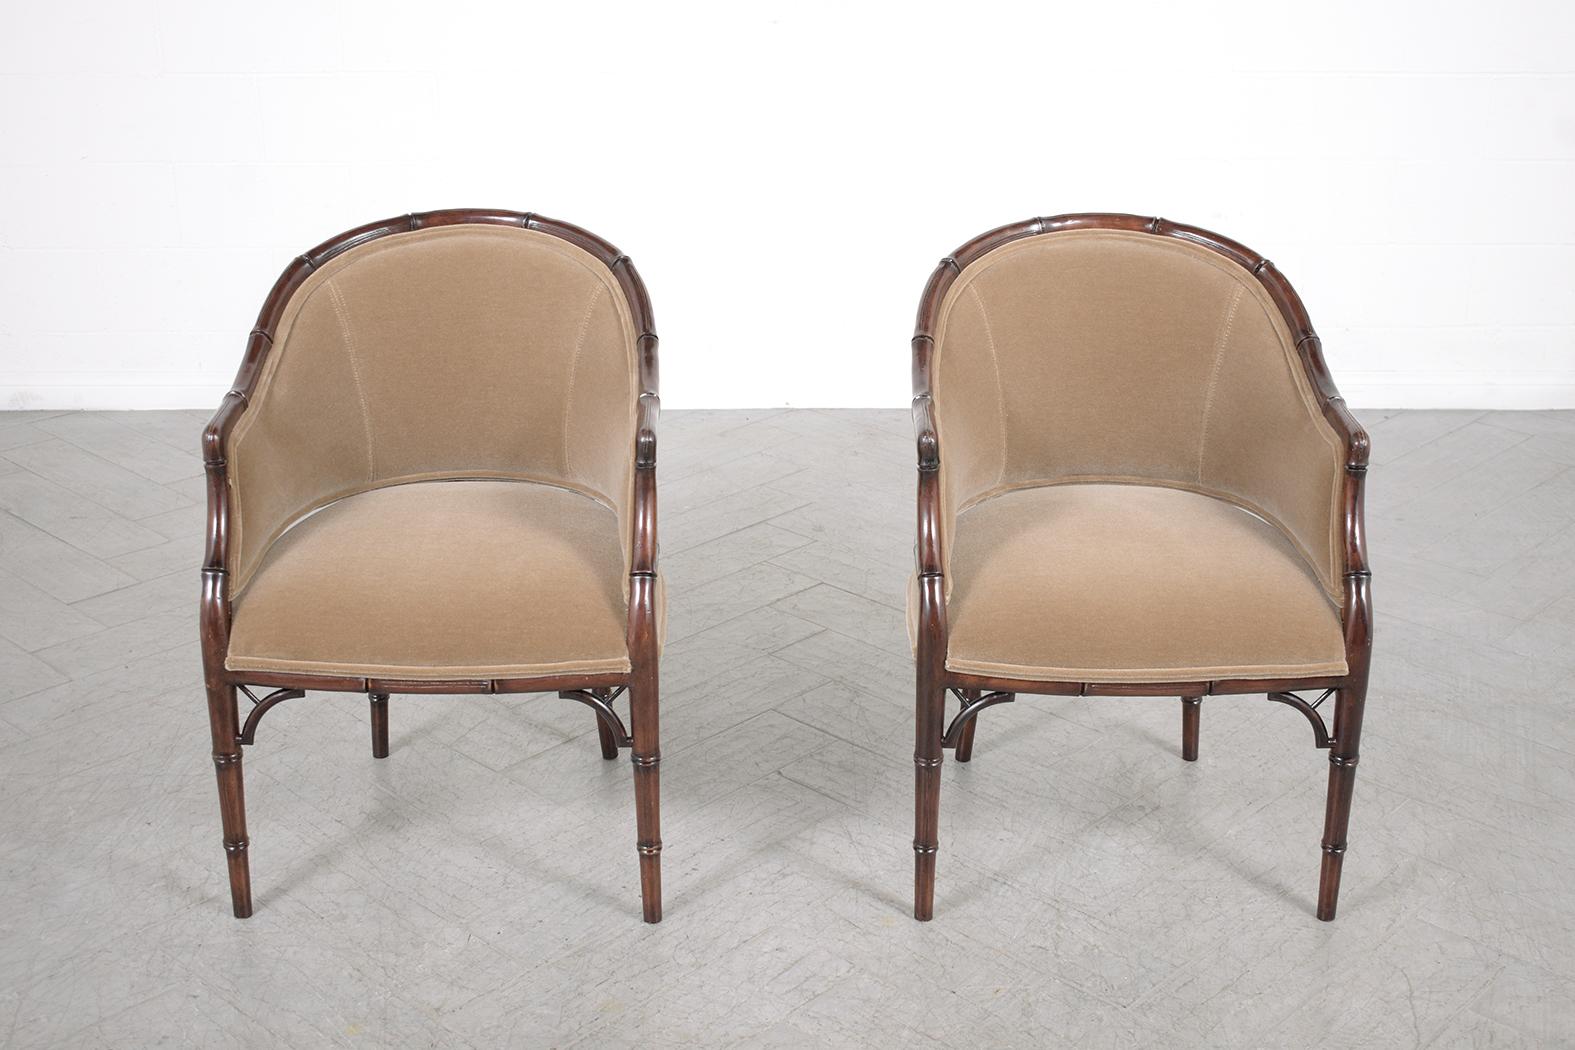 American Elegant Vintage Hollywood Regency Armchairs: Bamboo-Carved and Newly Refurbished For Sale